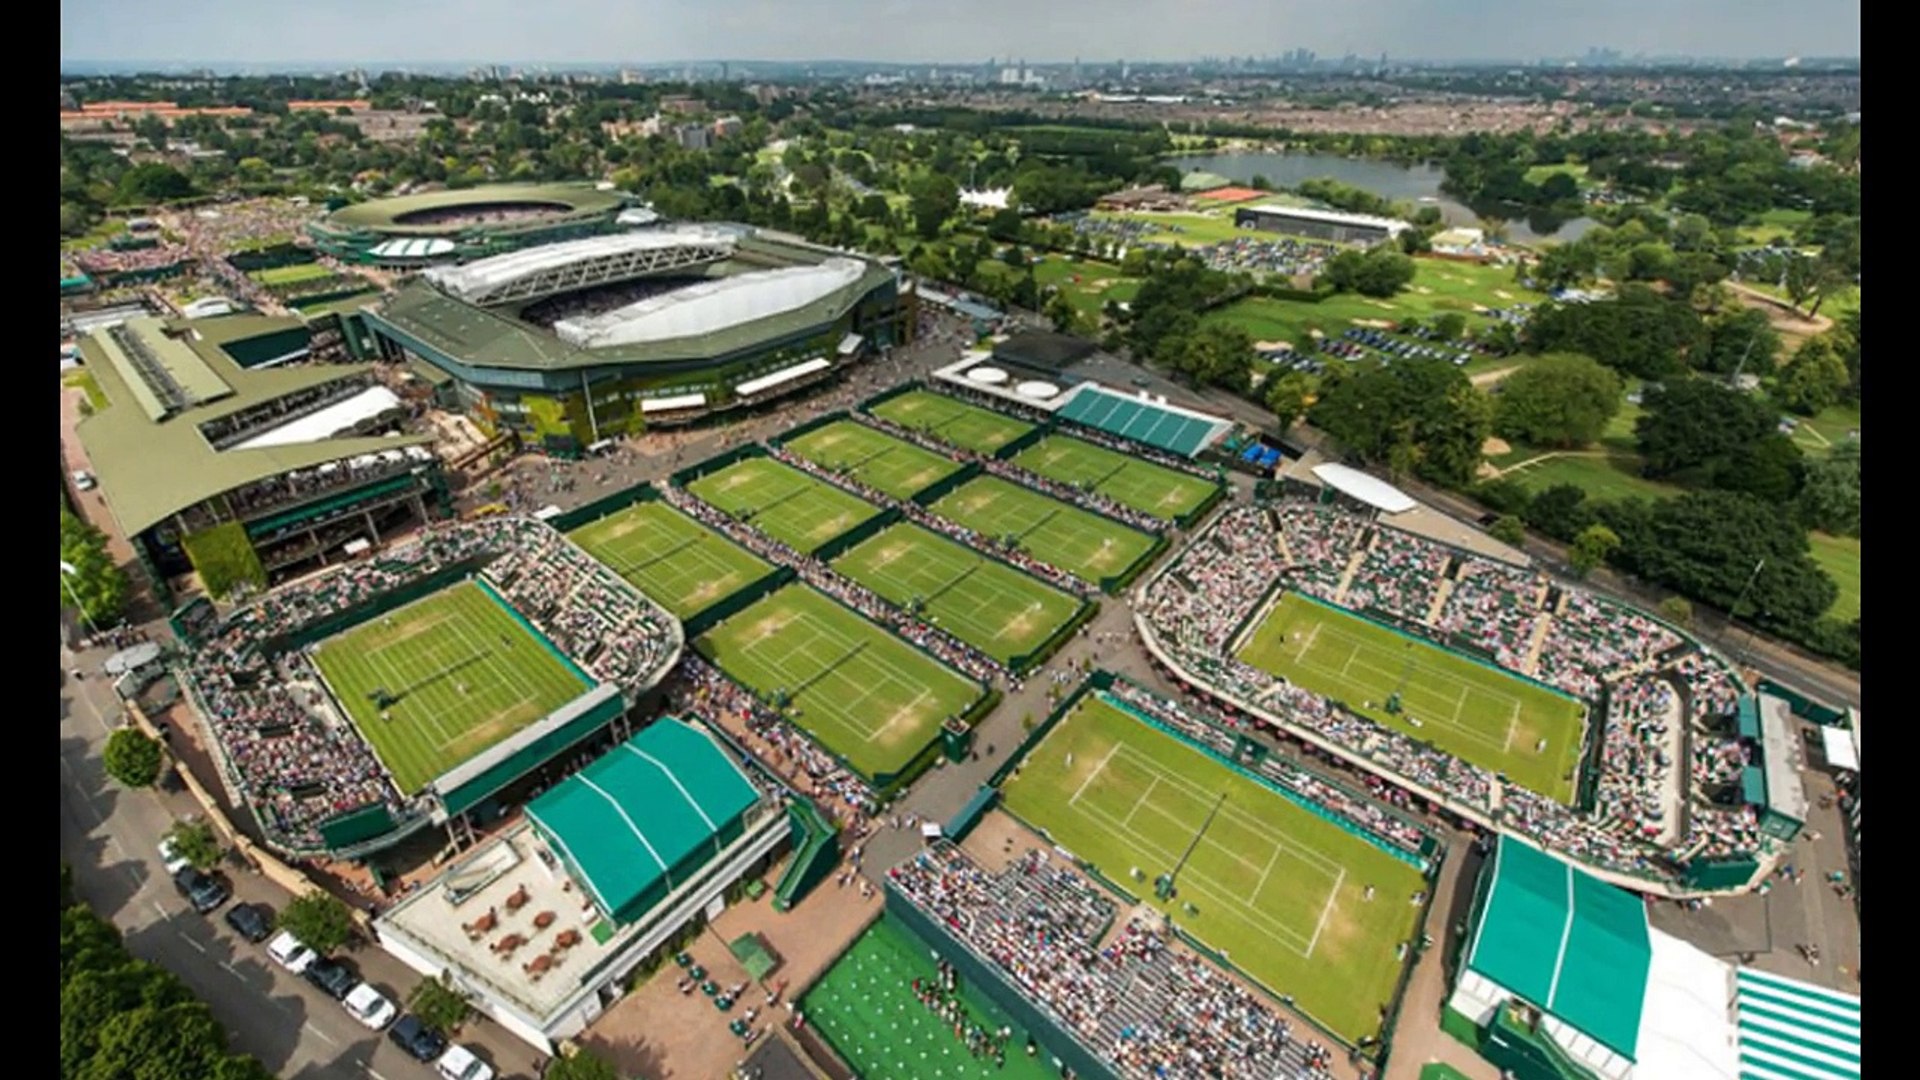 The Latest news of results about wimbledon 2017 .